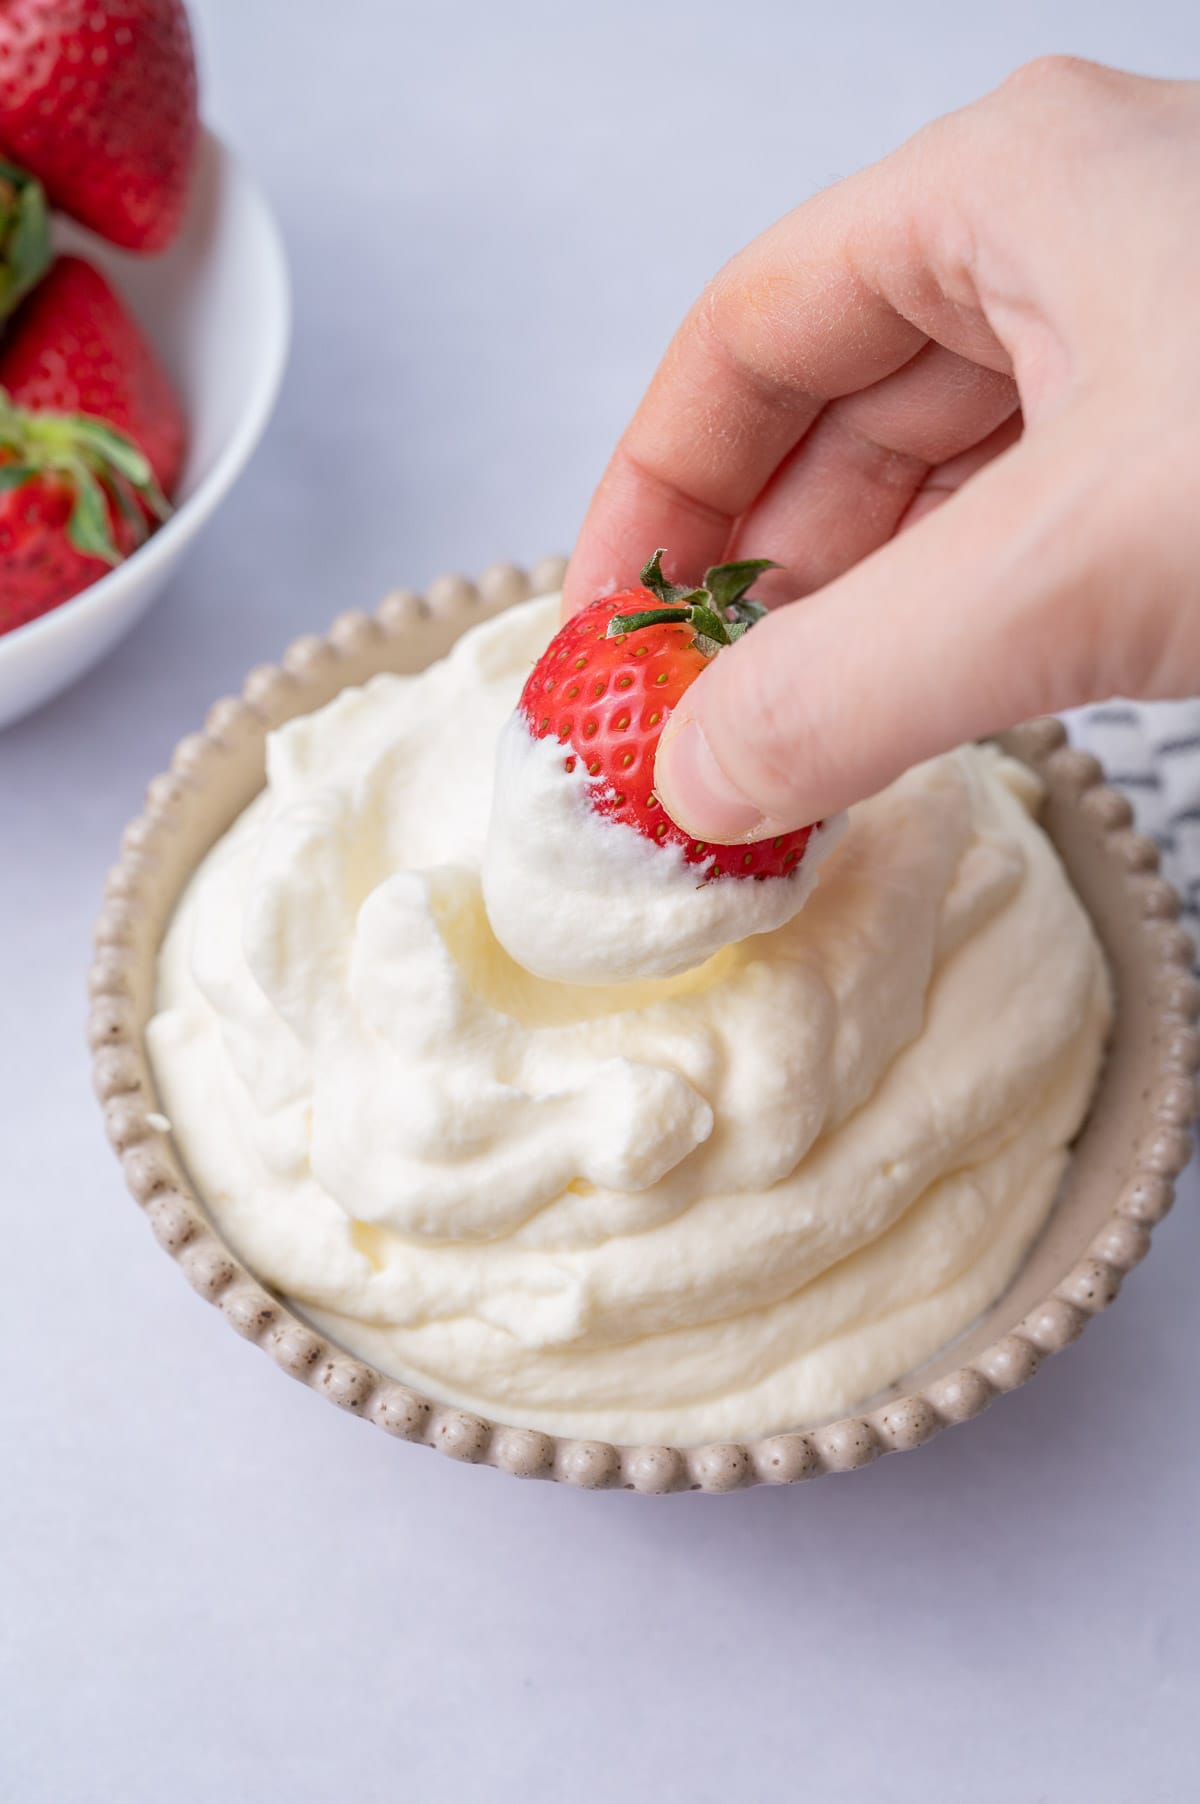 A strawberry is being dipped into whipped cream in a beige bowl.